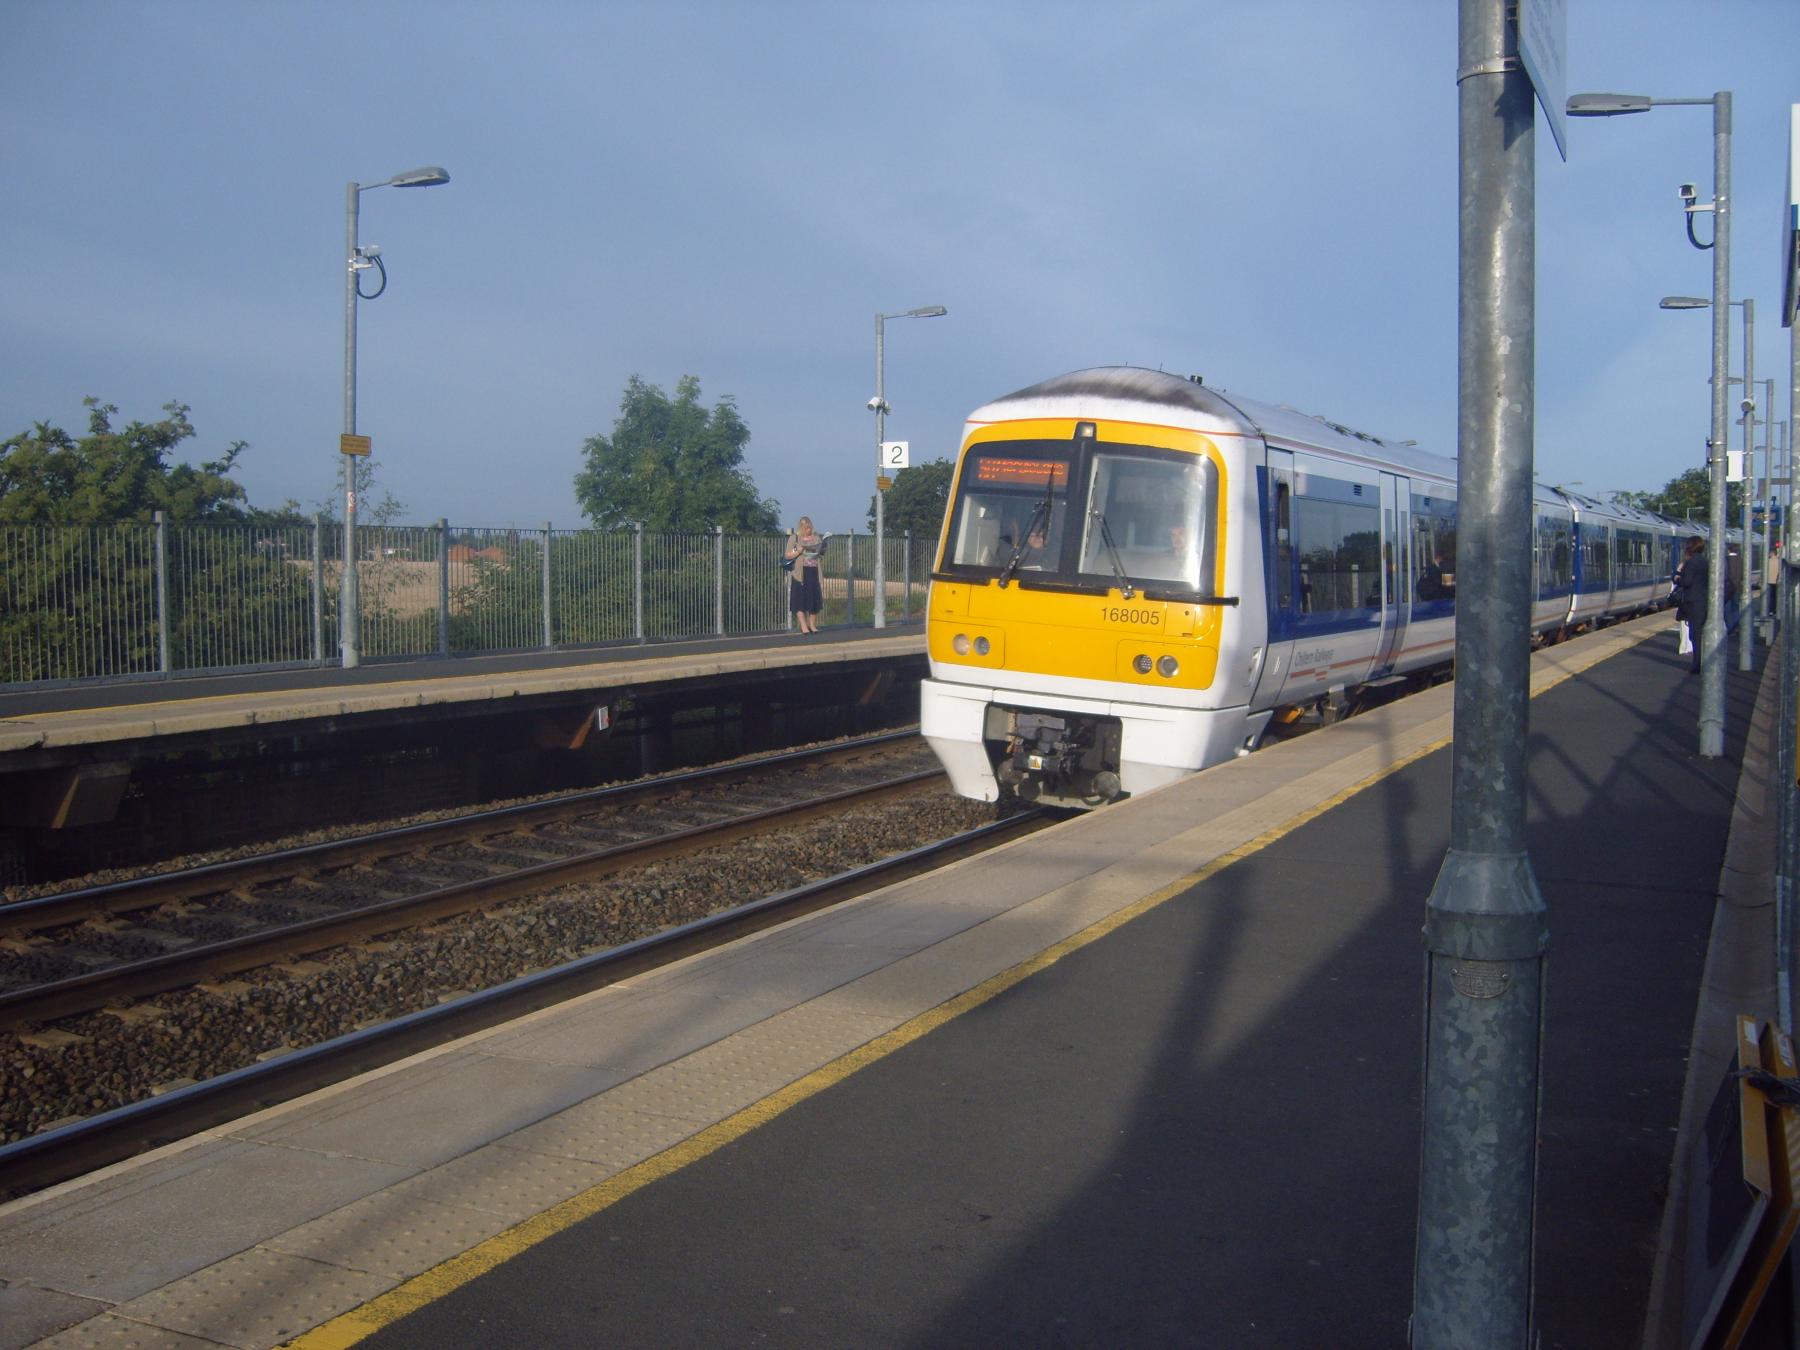 168 005 pauses at Warwick Parkway with a train for Marylebone.